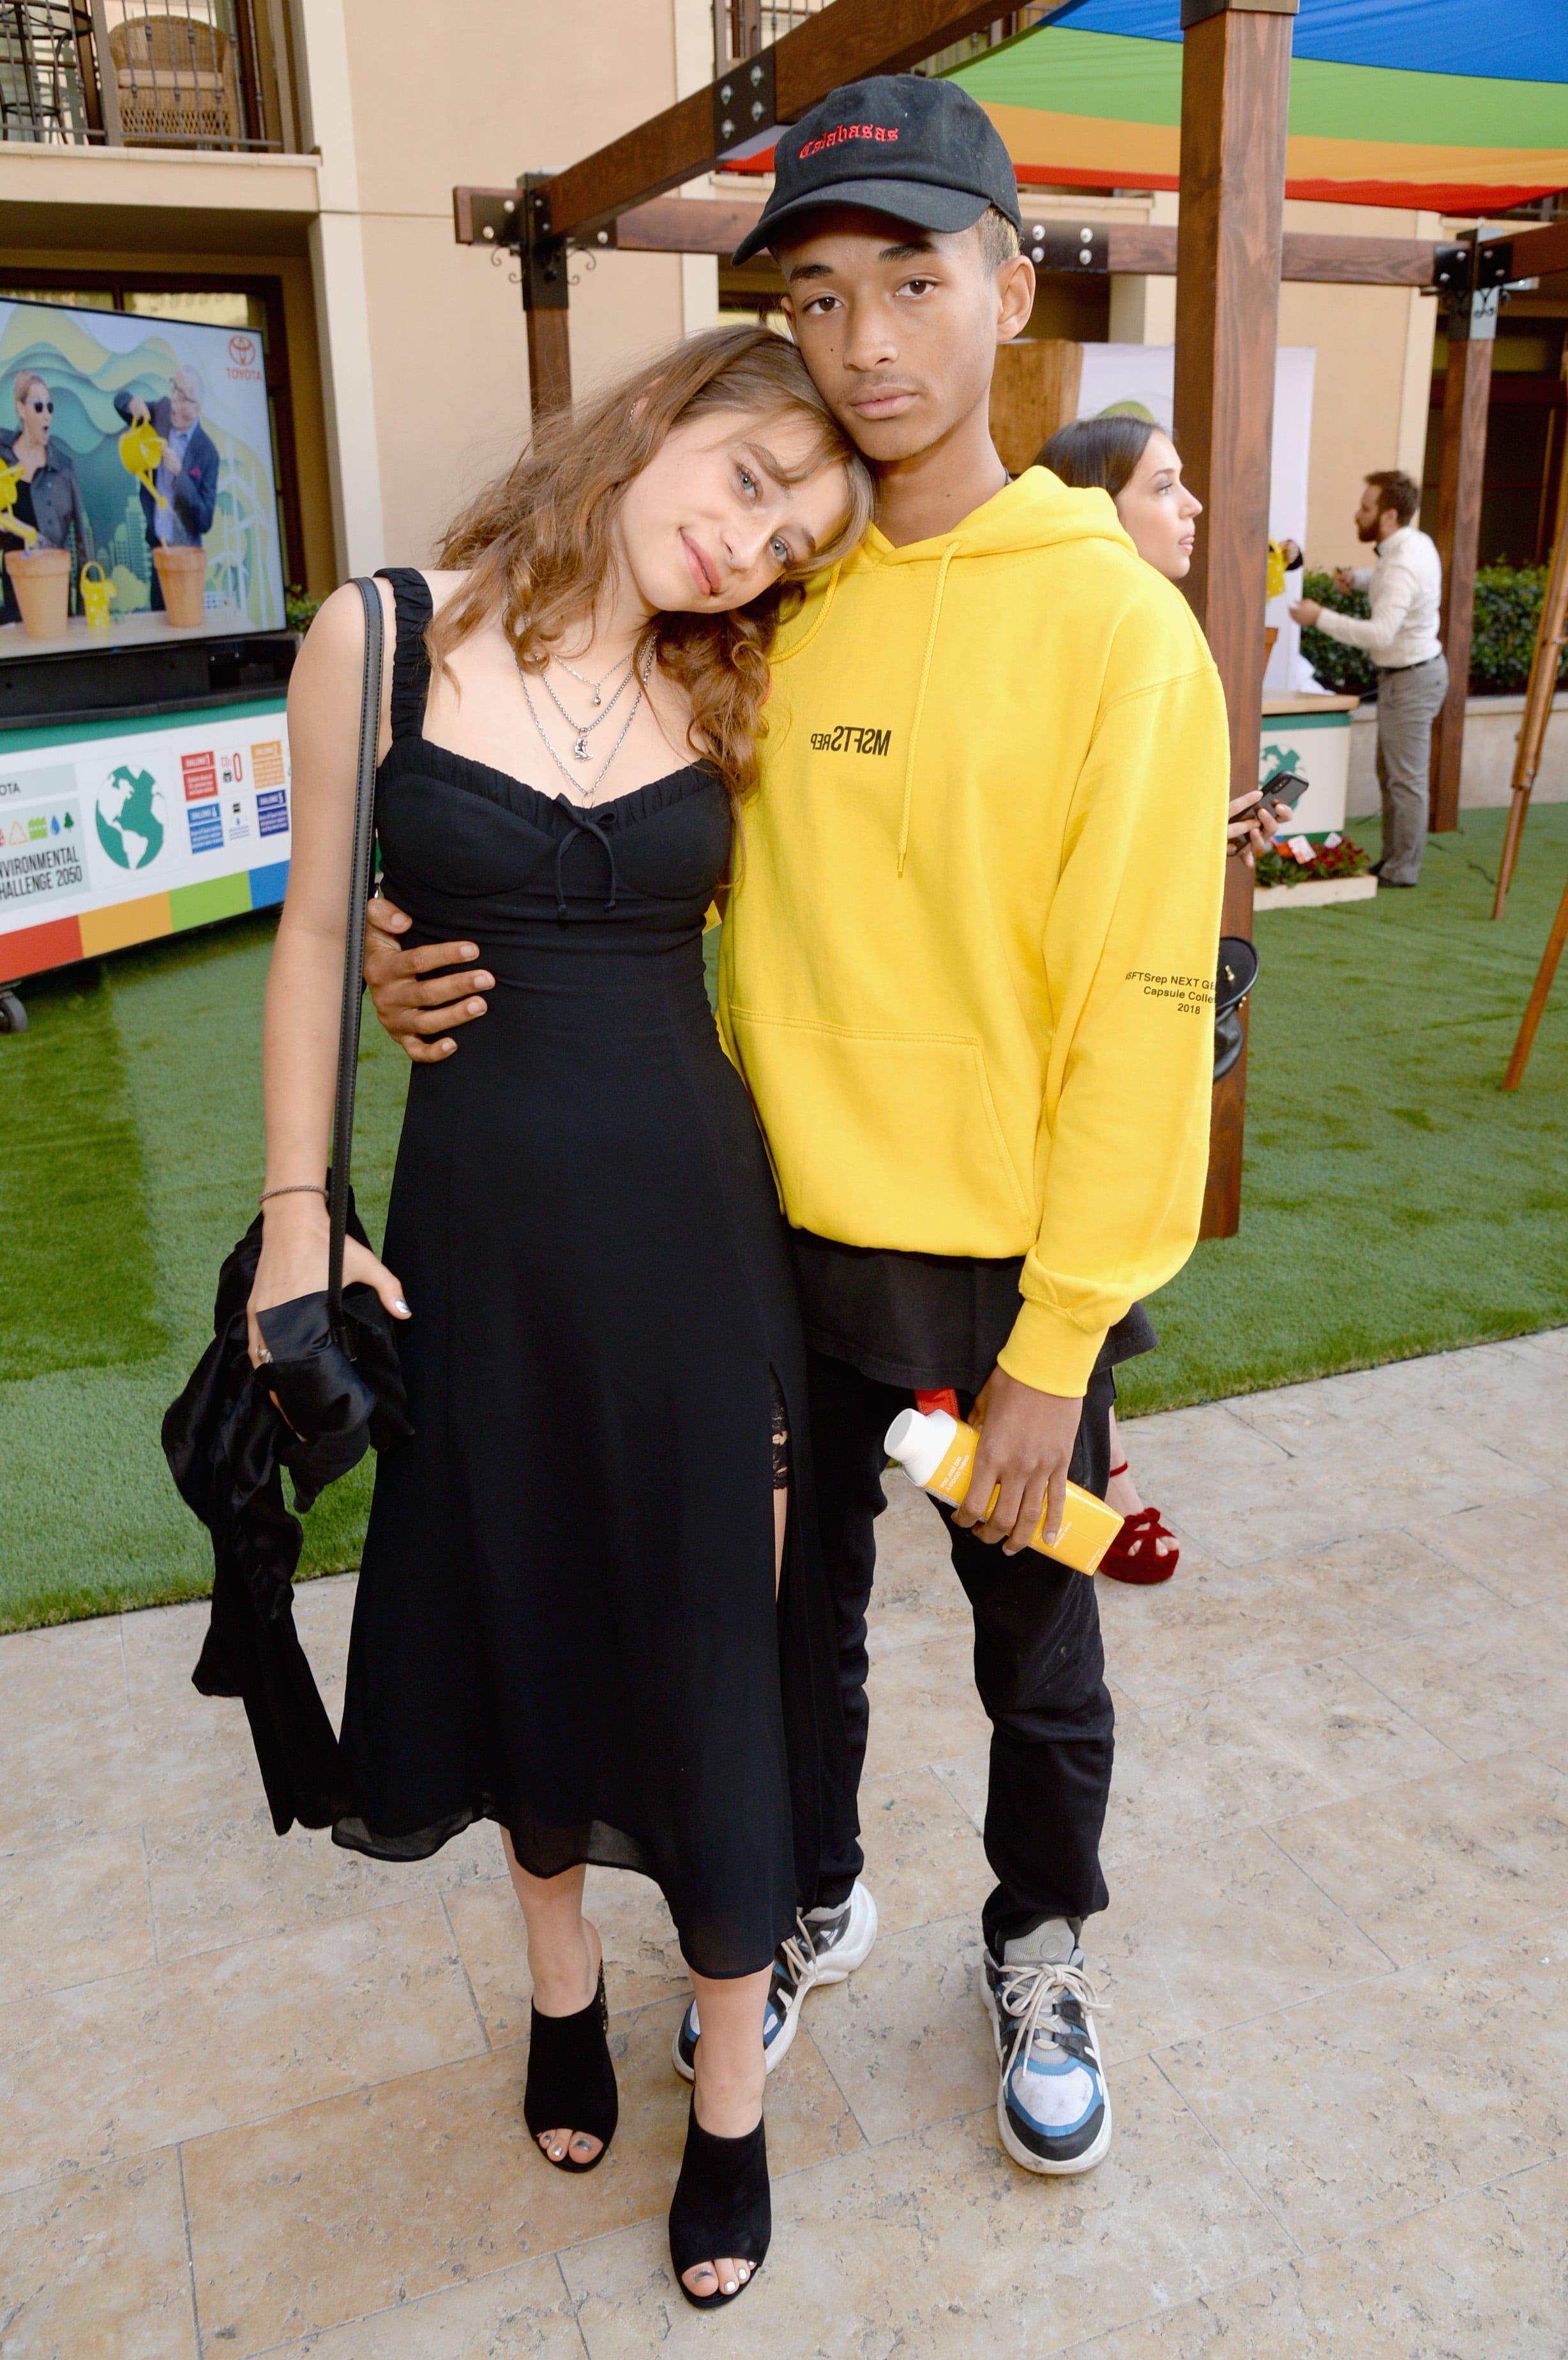 Who Has Jaden Smith Dated?